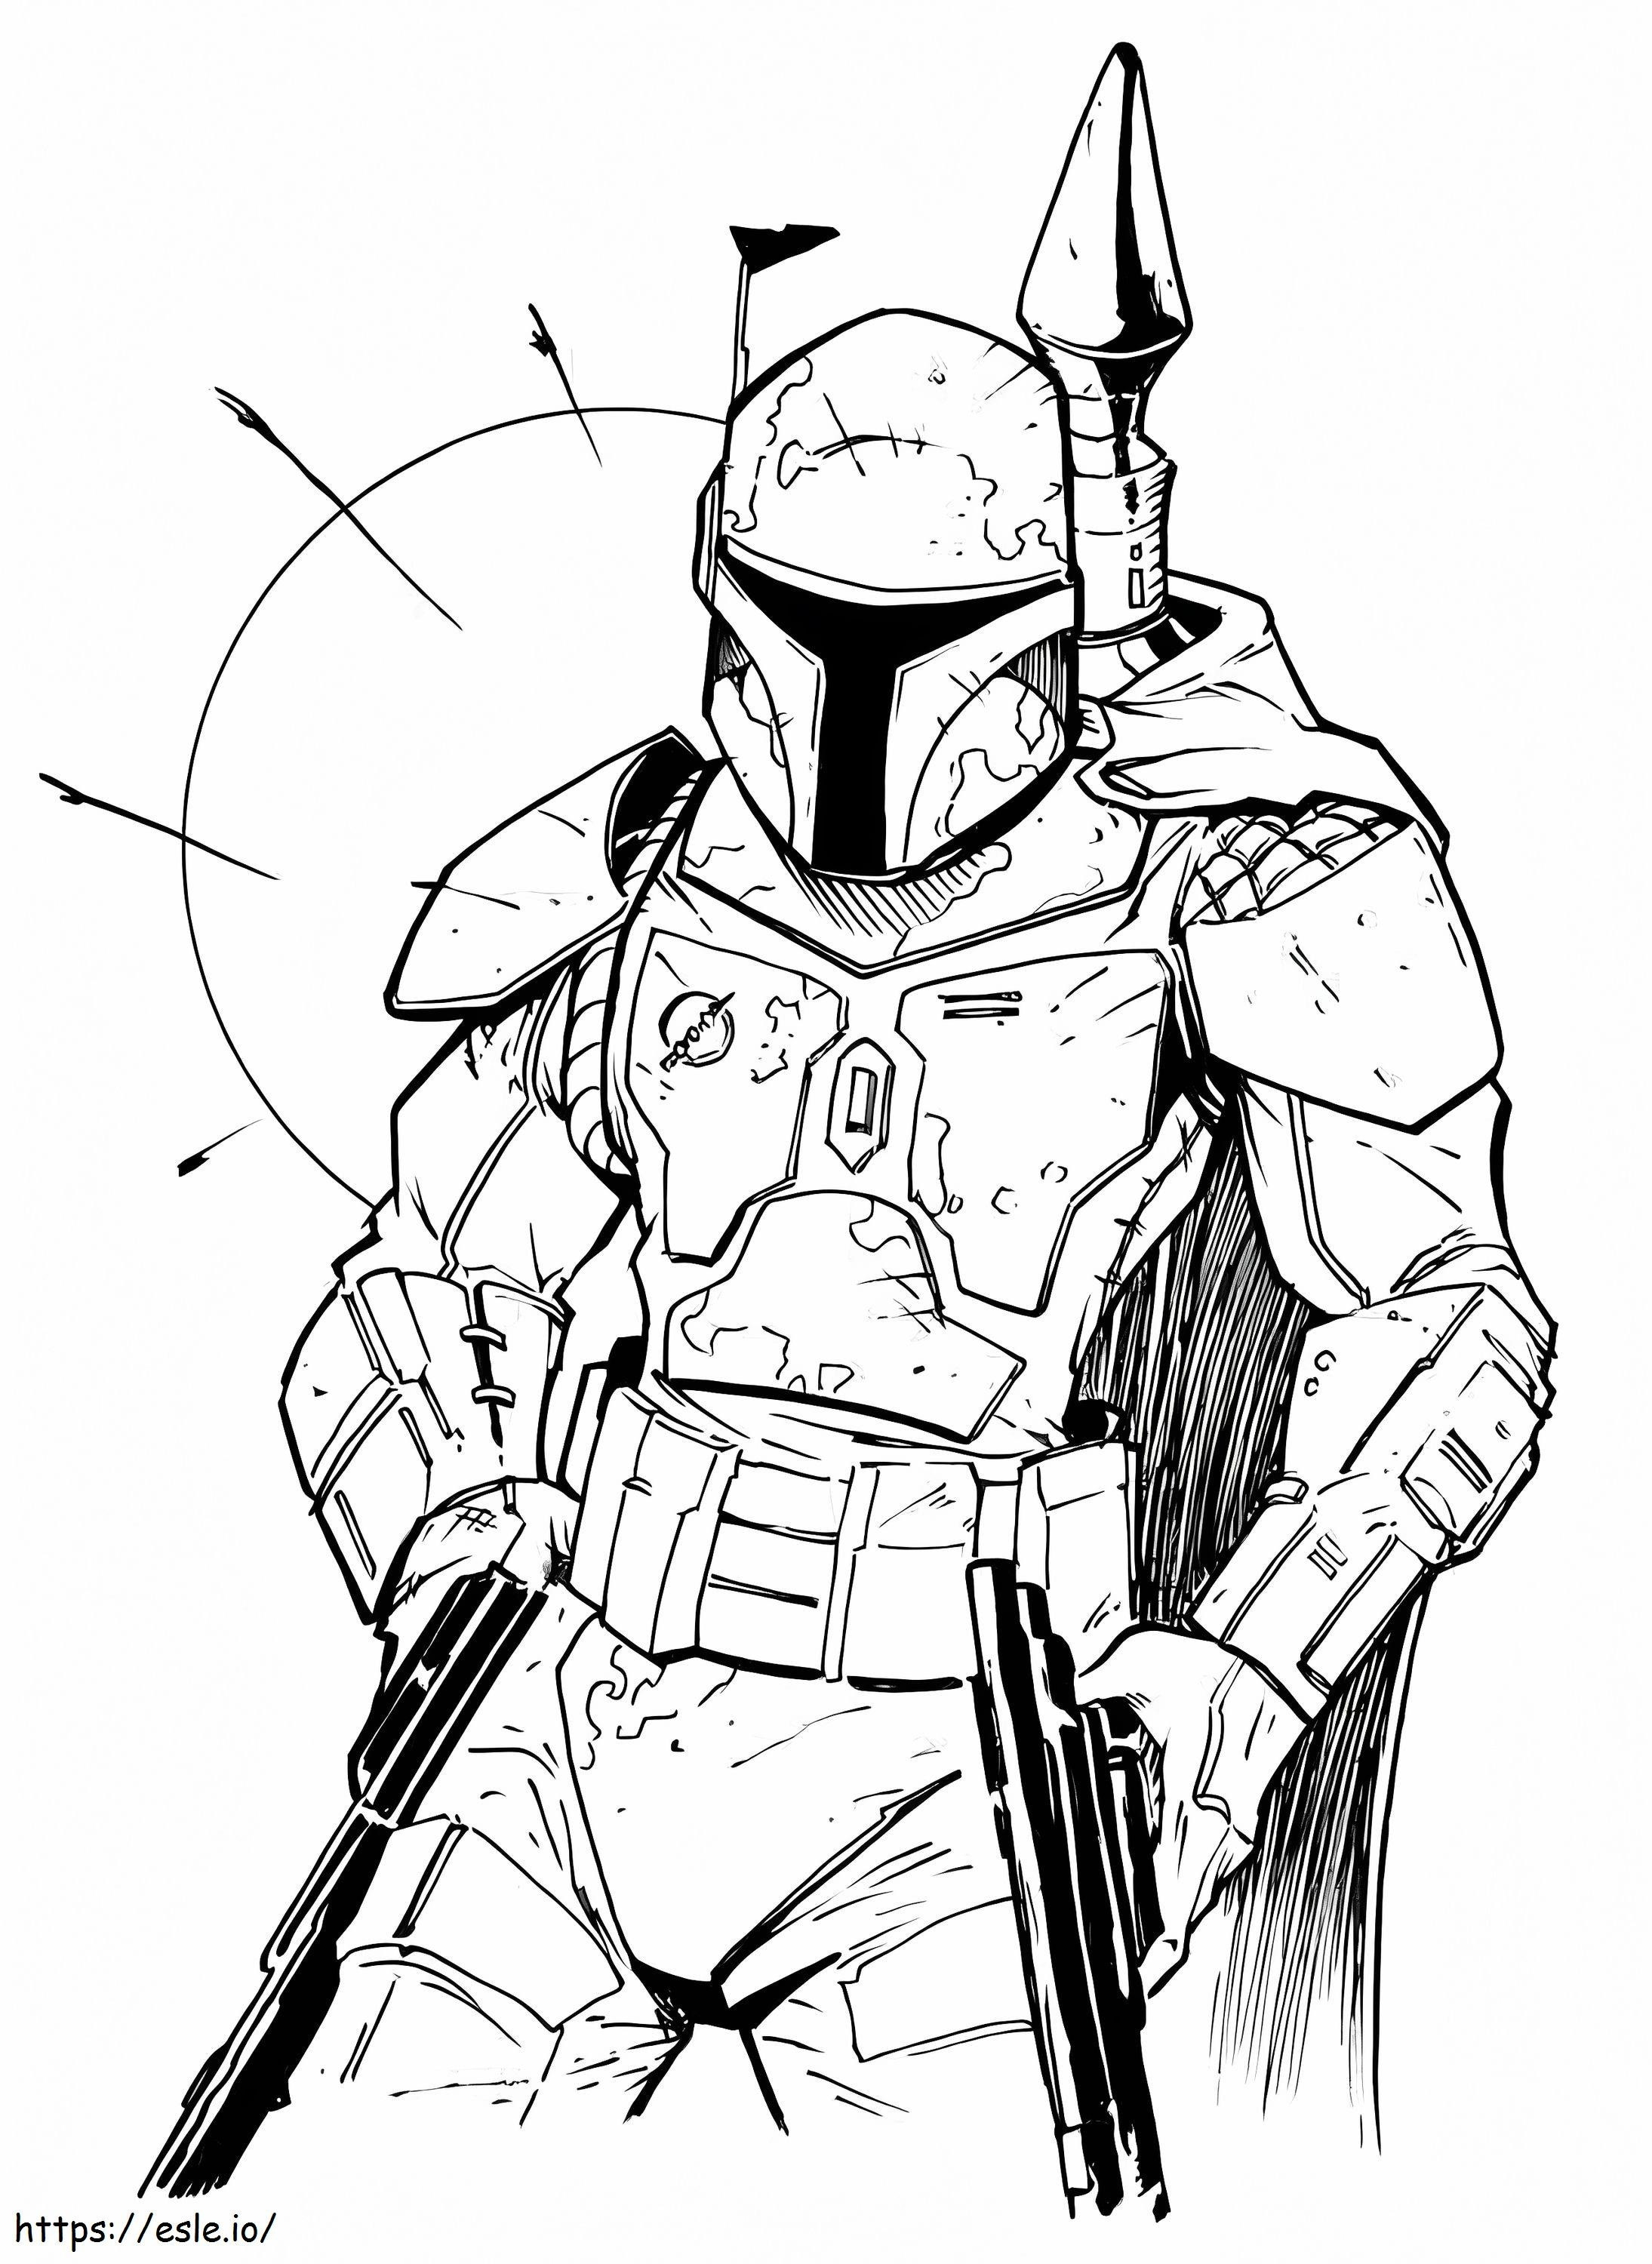 Boba Fett 2 coloring page